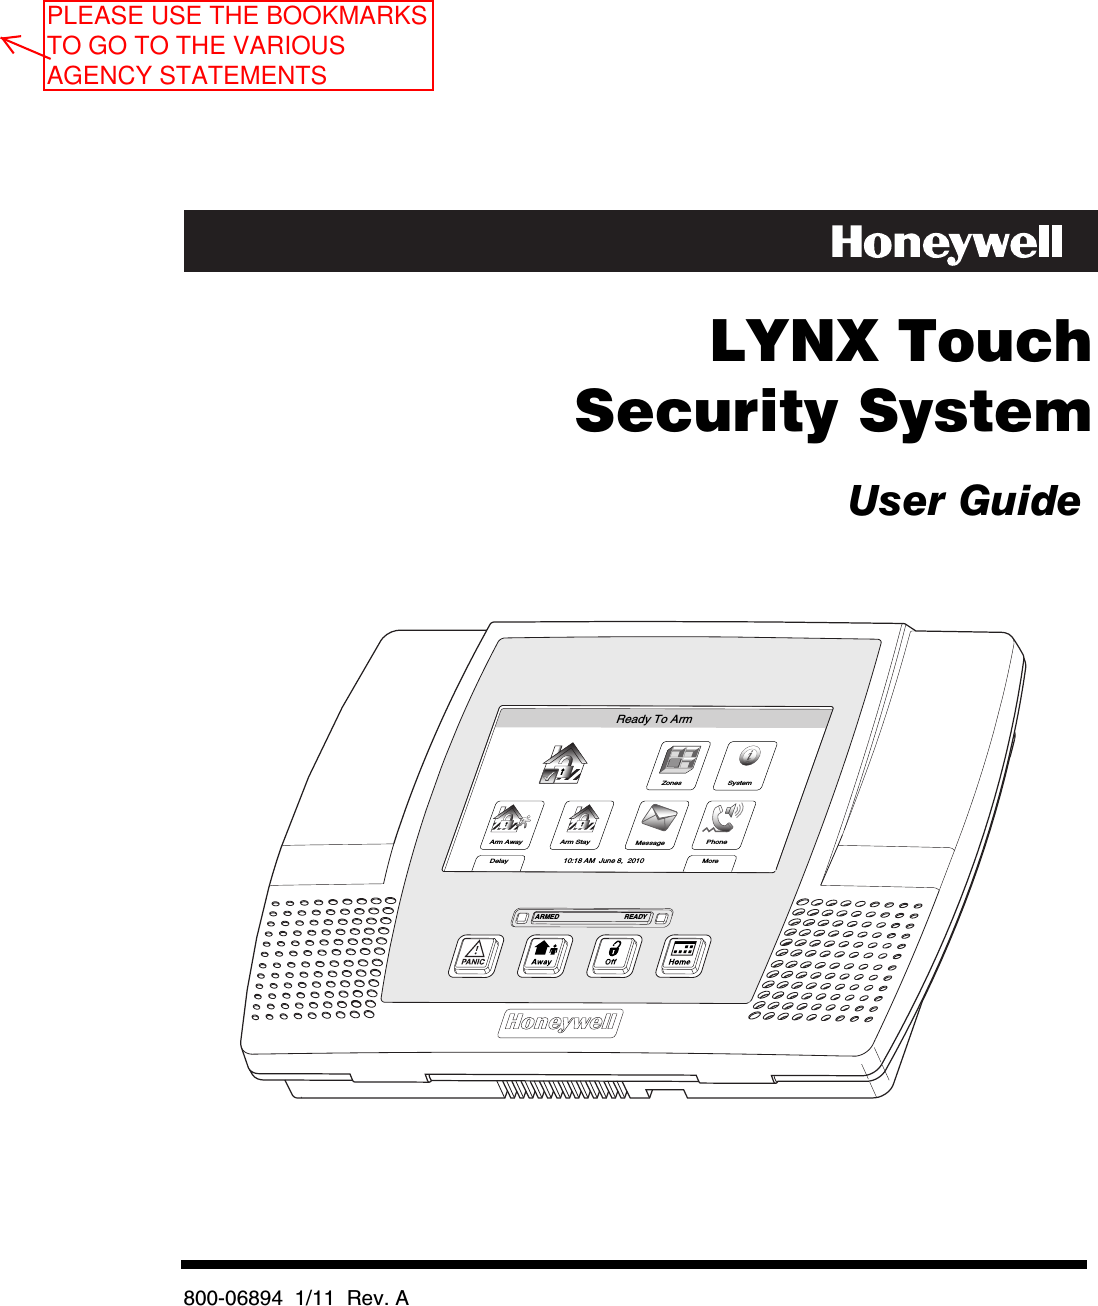        LYNX Touch   Security System   User Guide      ARMED READYZonesArm AwayReady To ArmArm StayMoreDelayPhone10:18 AM  June 8,  2010MessageSystem       800-06894  1/11  Rev. A   PLEASE USE THE BOOKMARKS TO GO TO THE VARIOUS AGENCY STATEMENTS